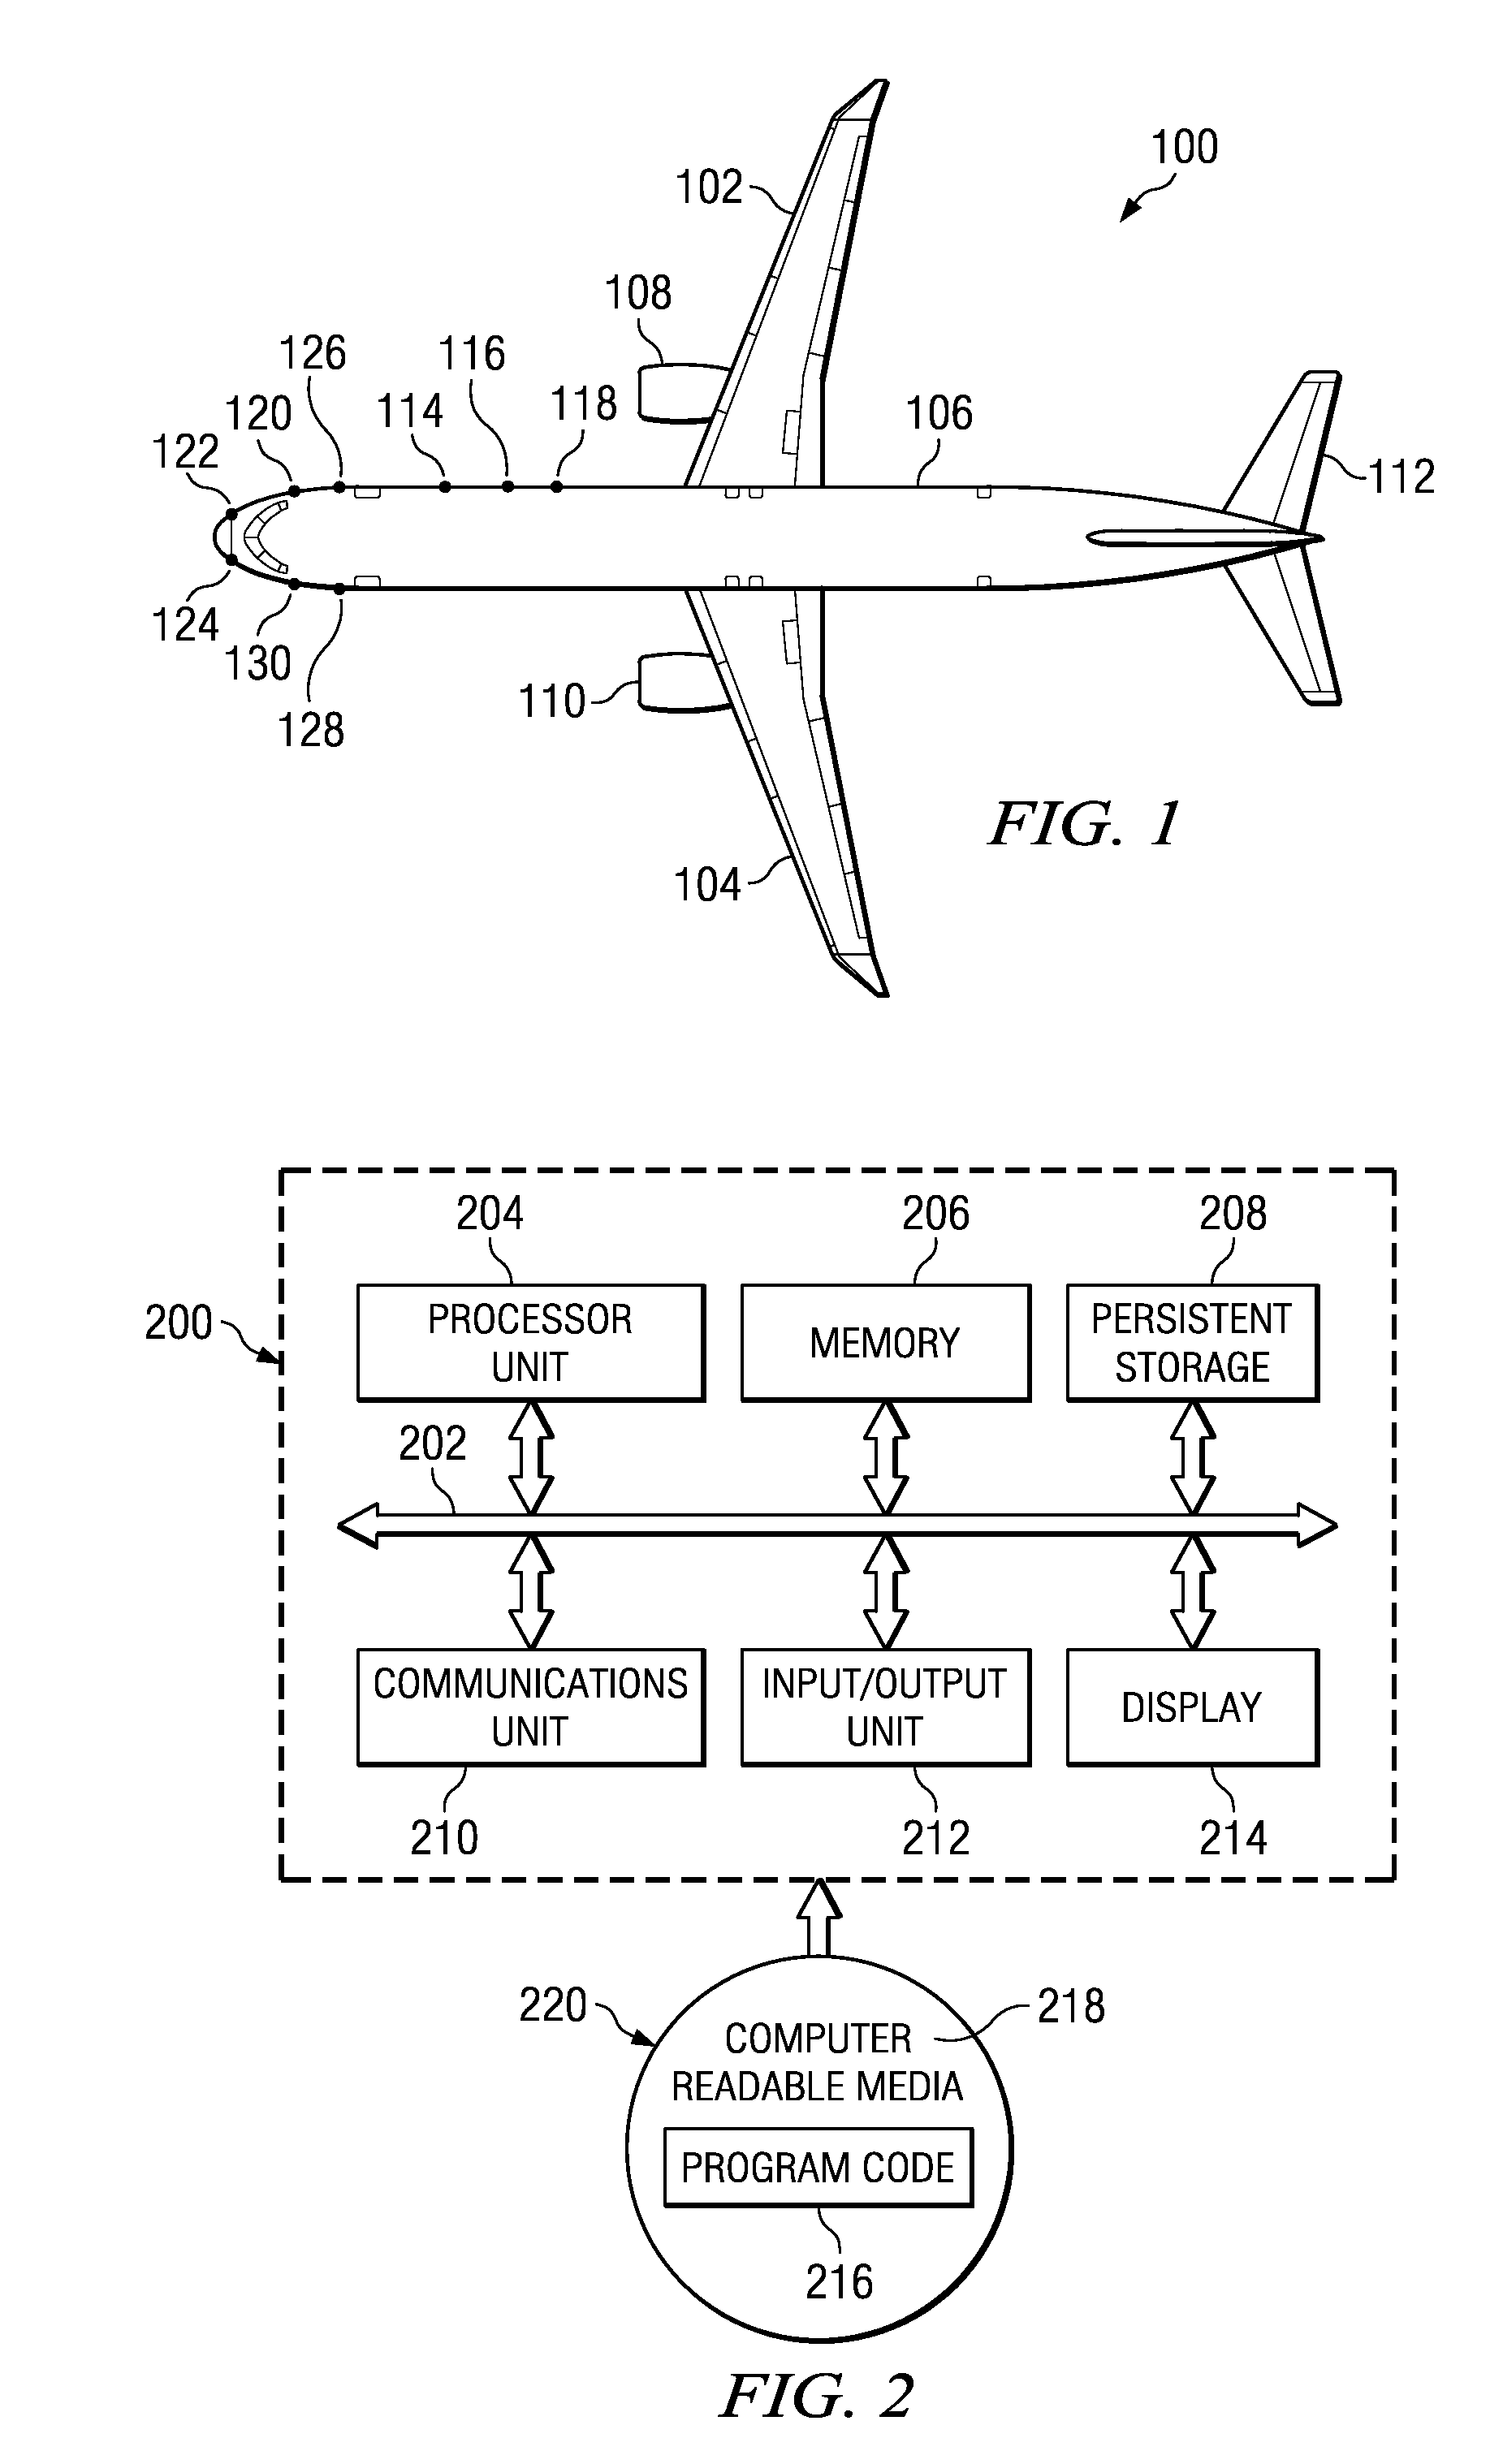 Alternative method to determine the air mass state of an aircraft and to validate and augment the primary method